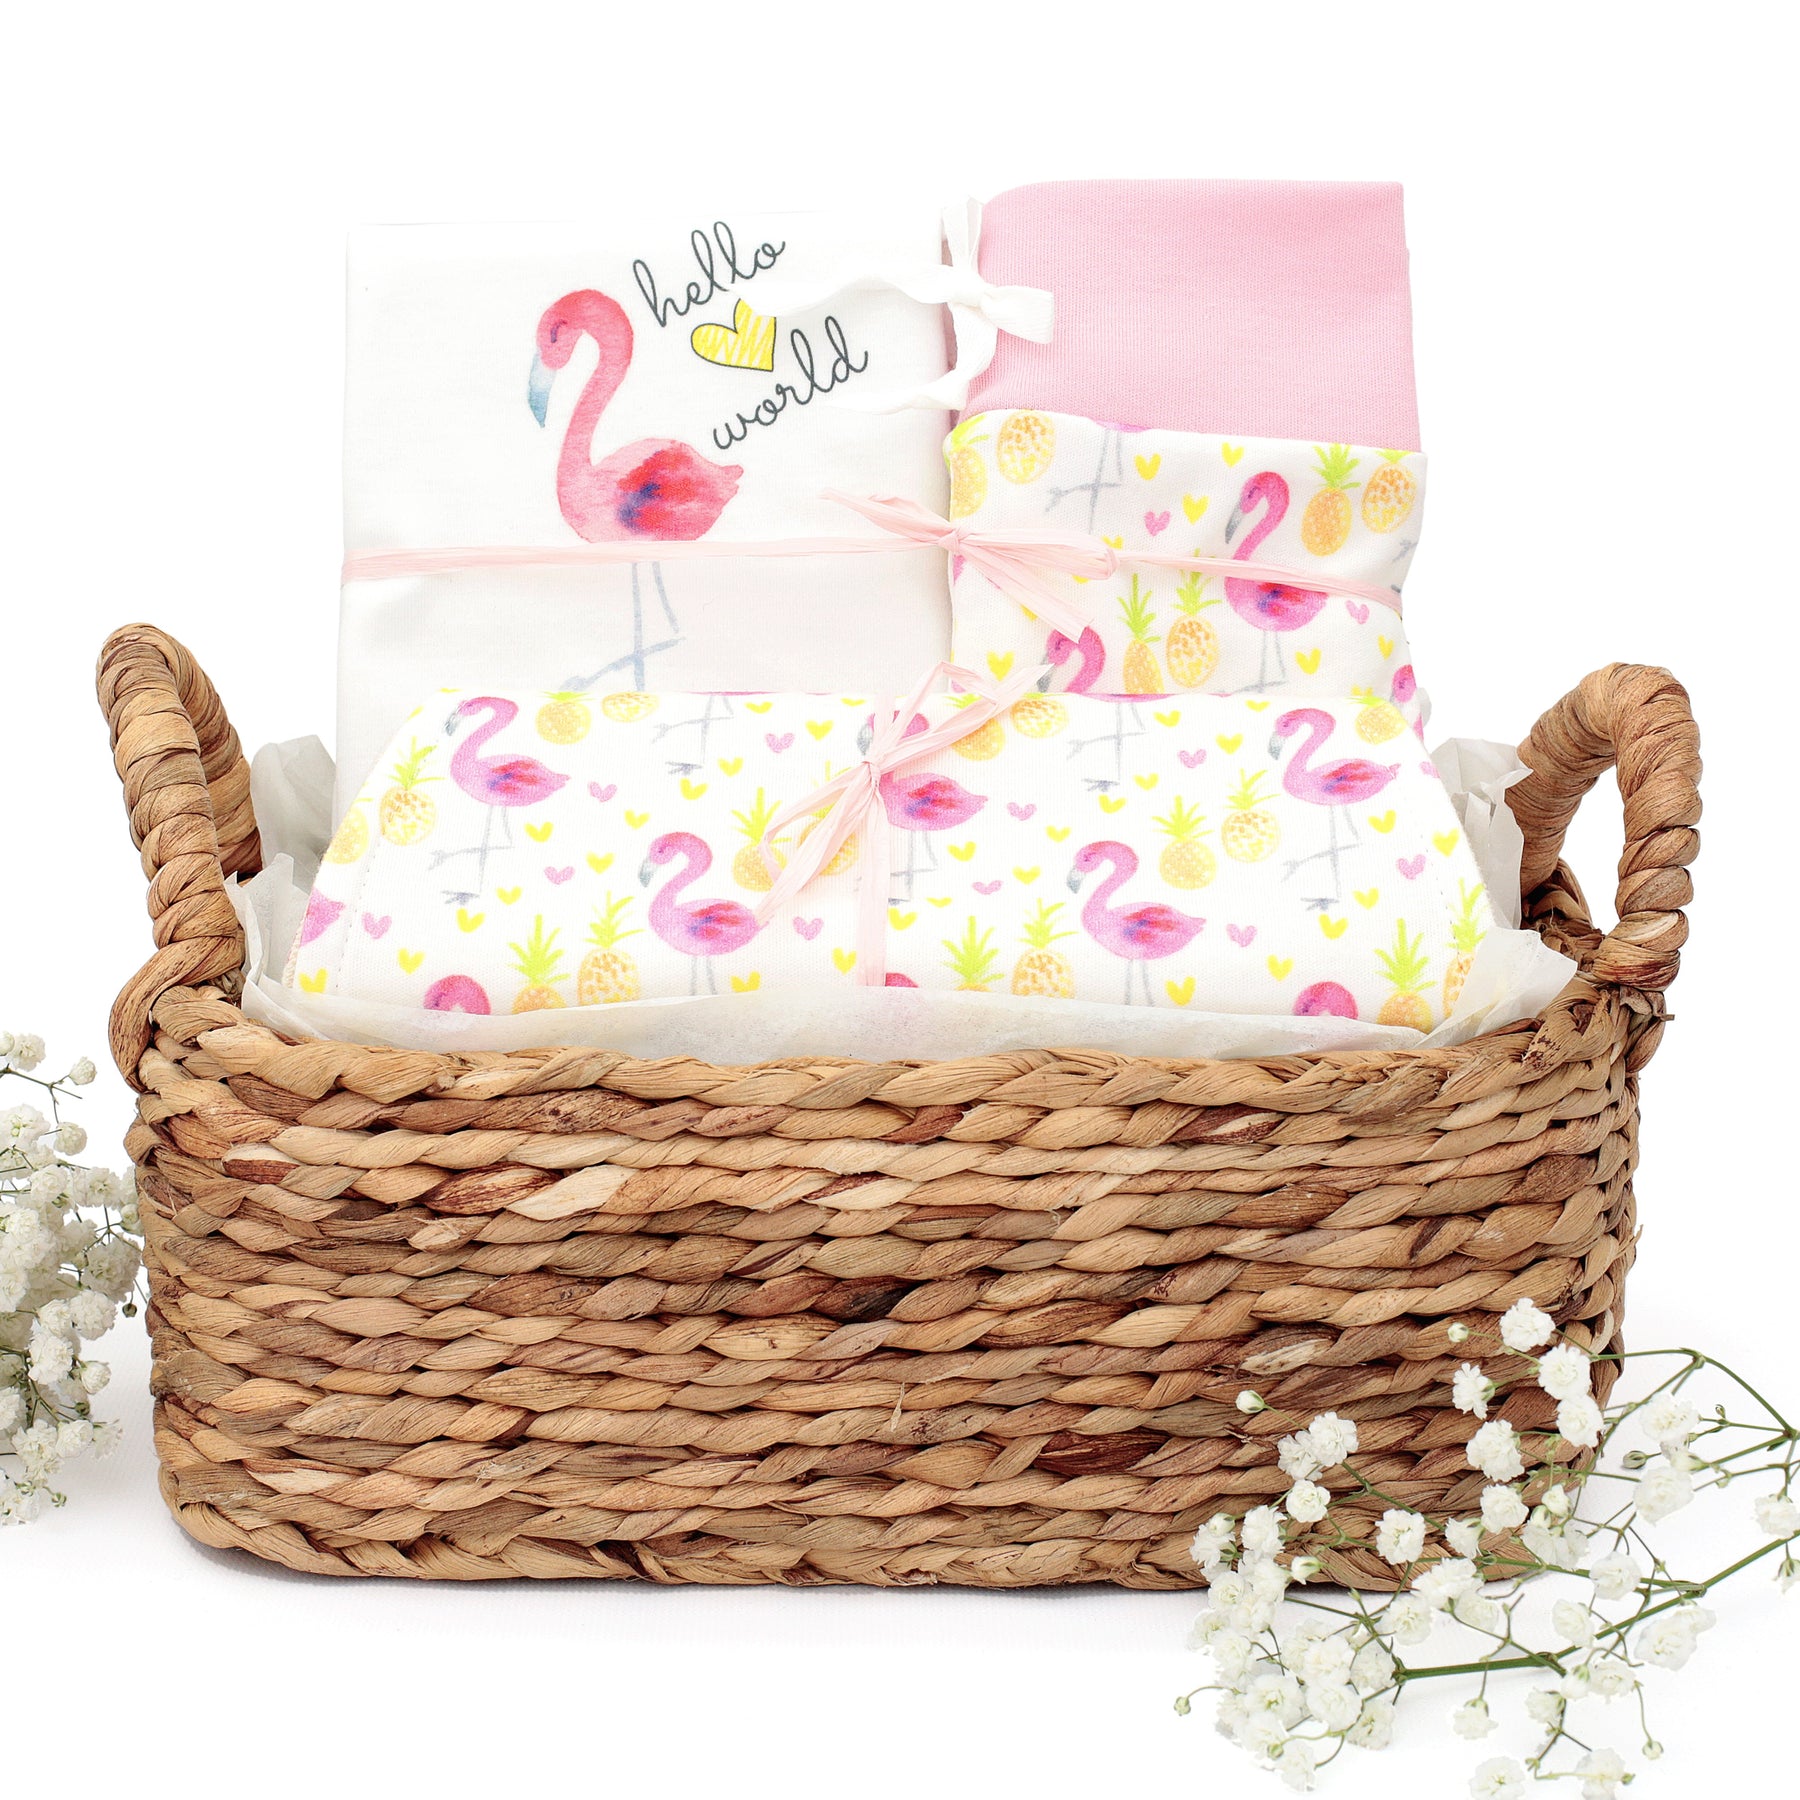 Floral Gift box – The Gifts Quest